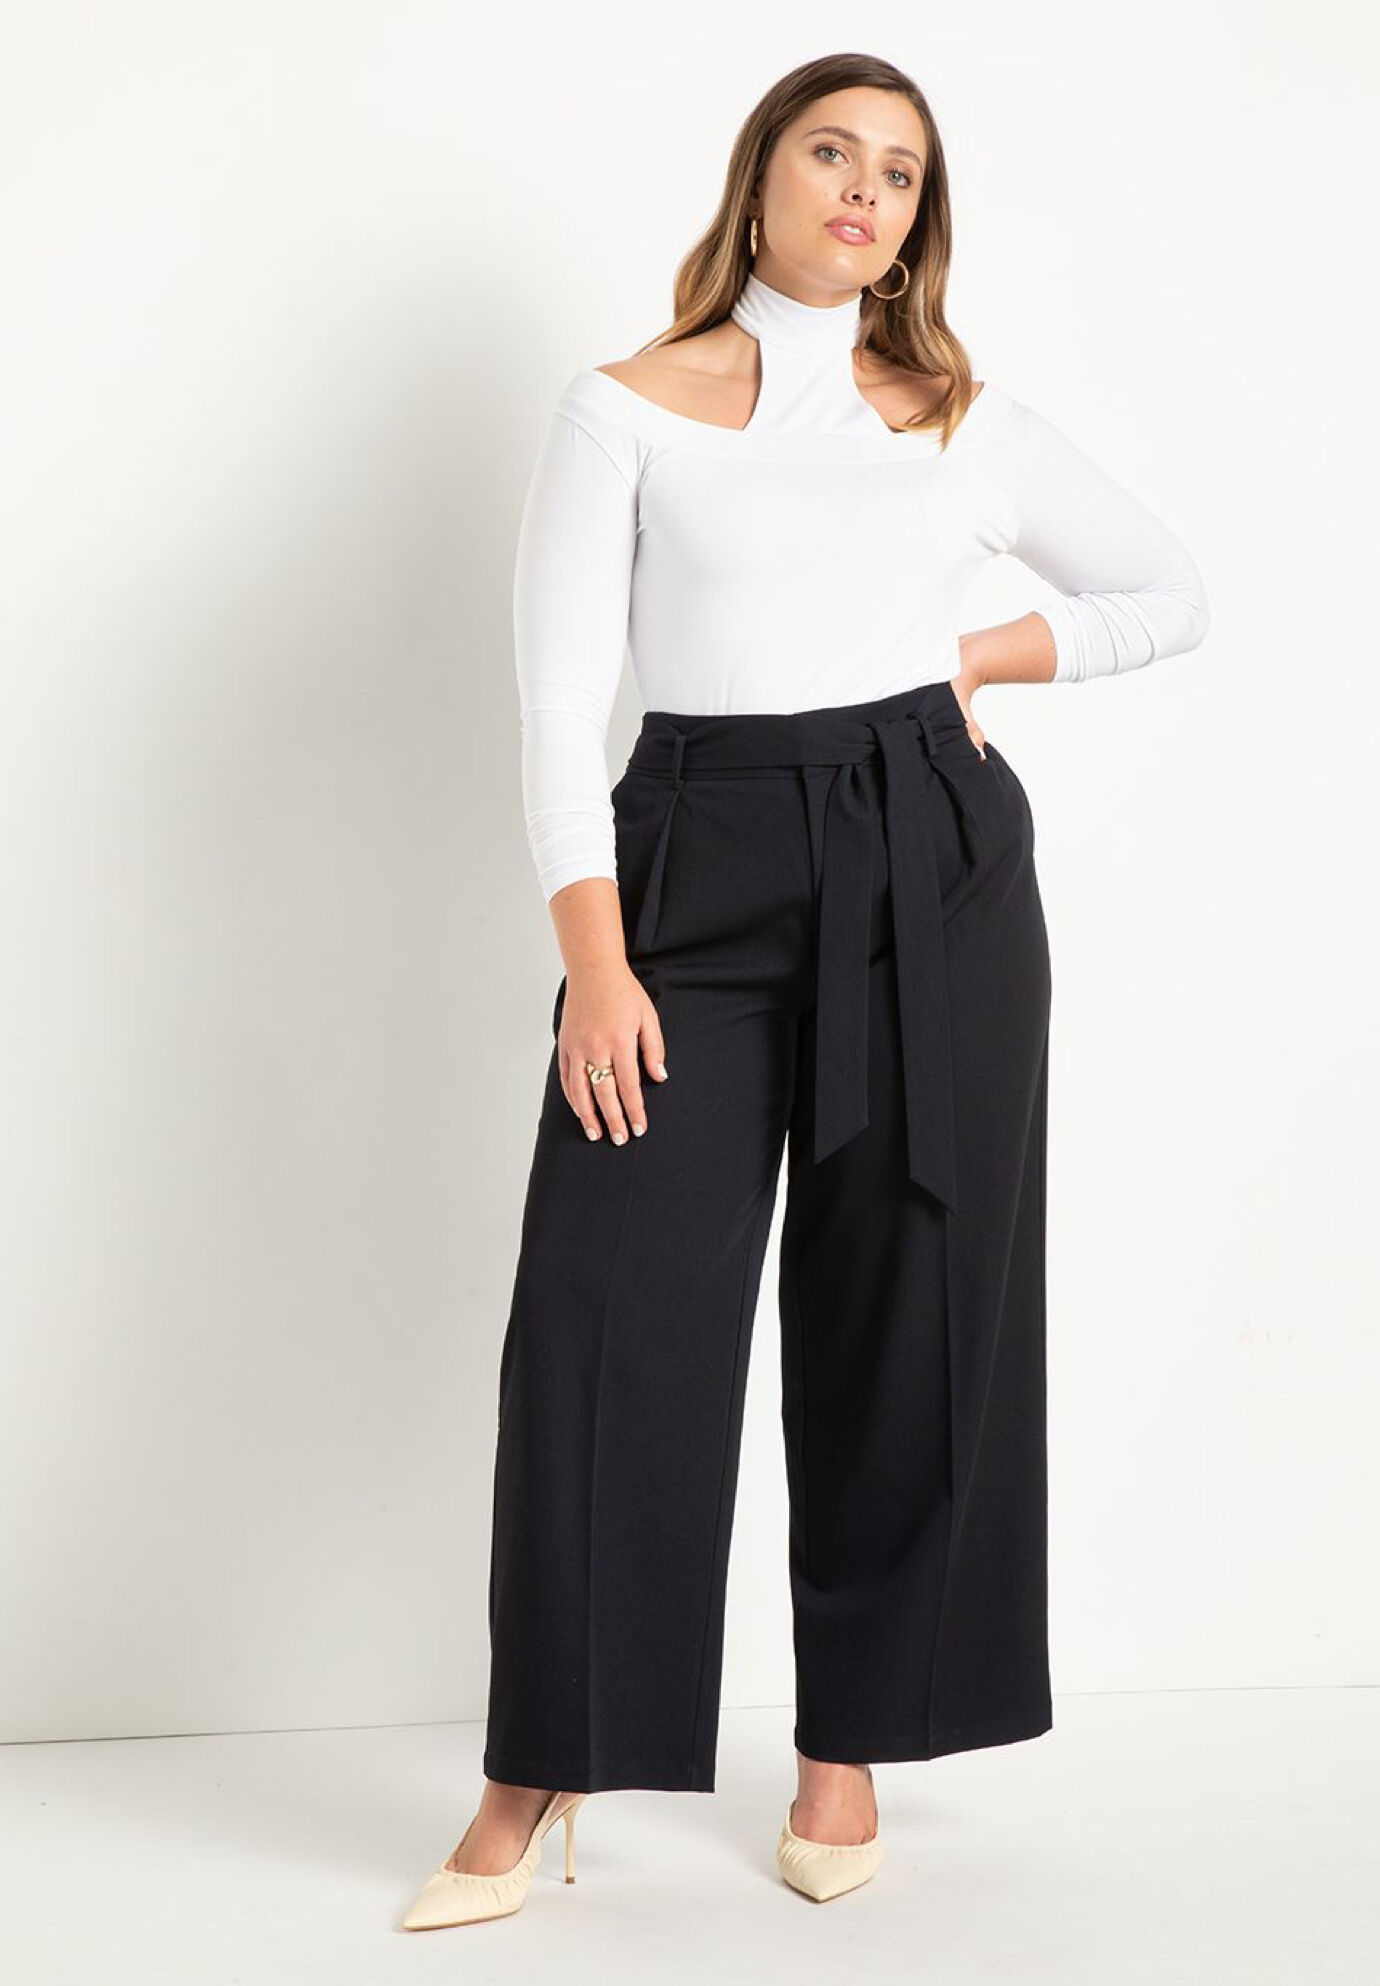 Black High Waist Trousers for Women, Business Casual Trousers for Women,  Office Palazzo Pants for Tall Women, Classic Palazzo Pants - Etsy